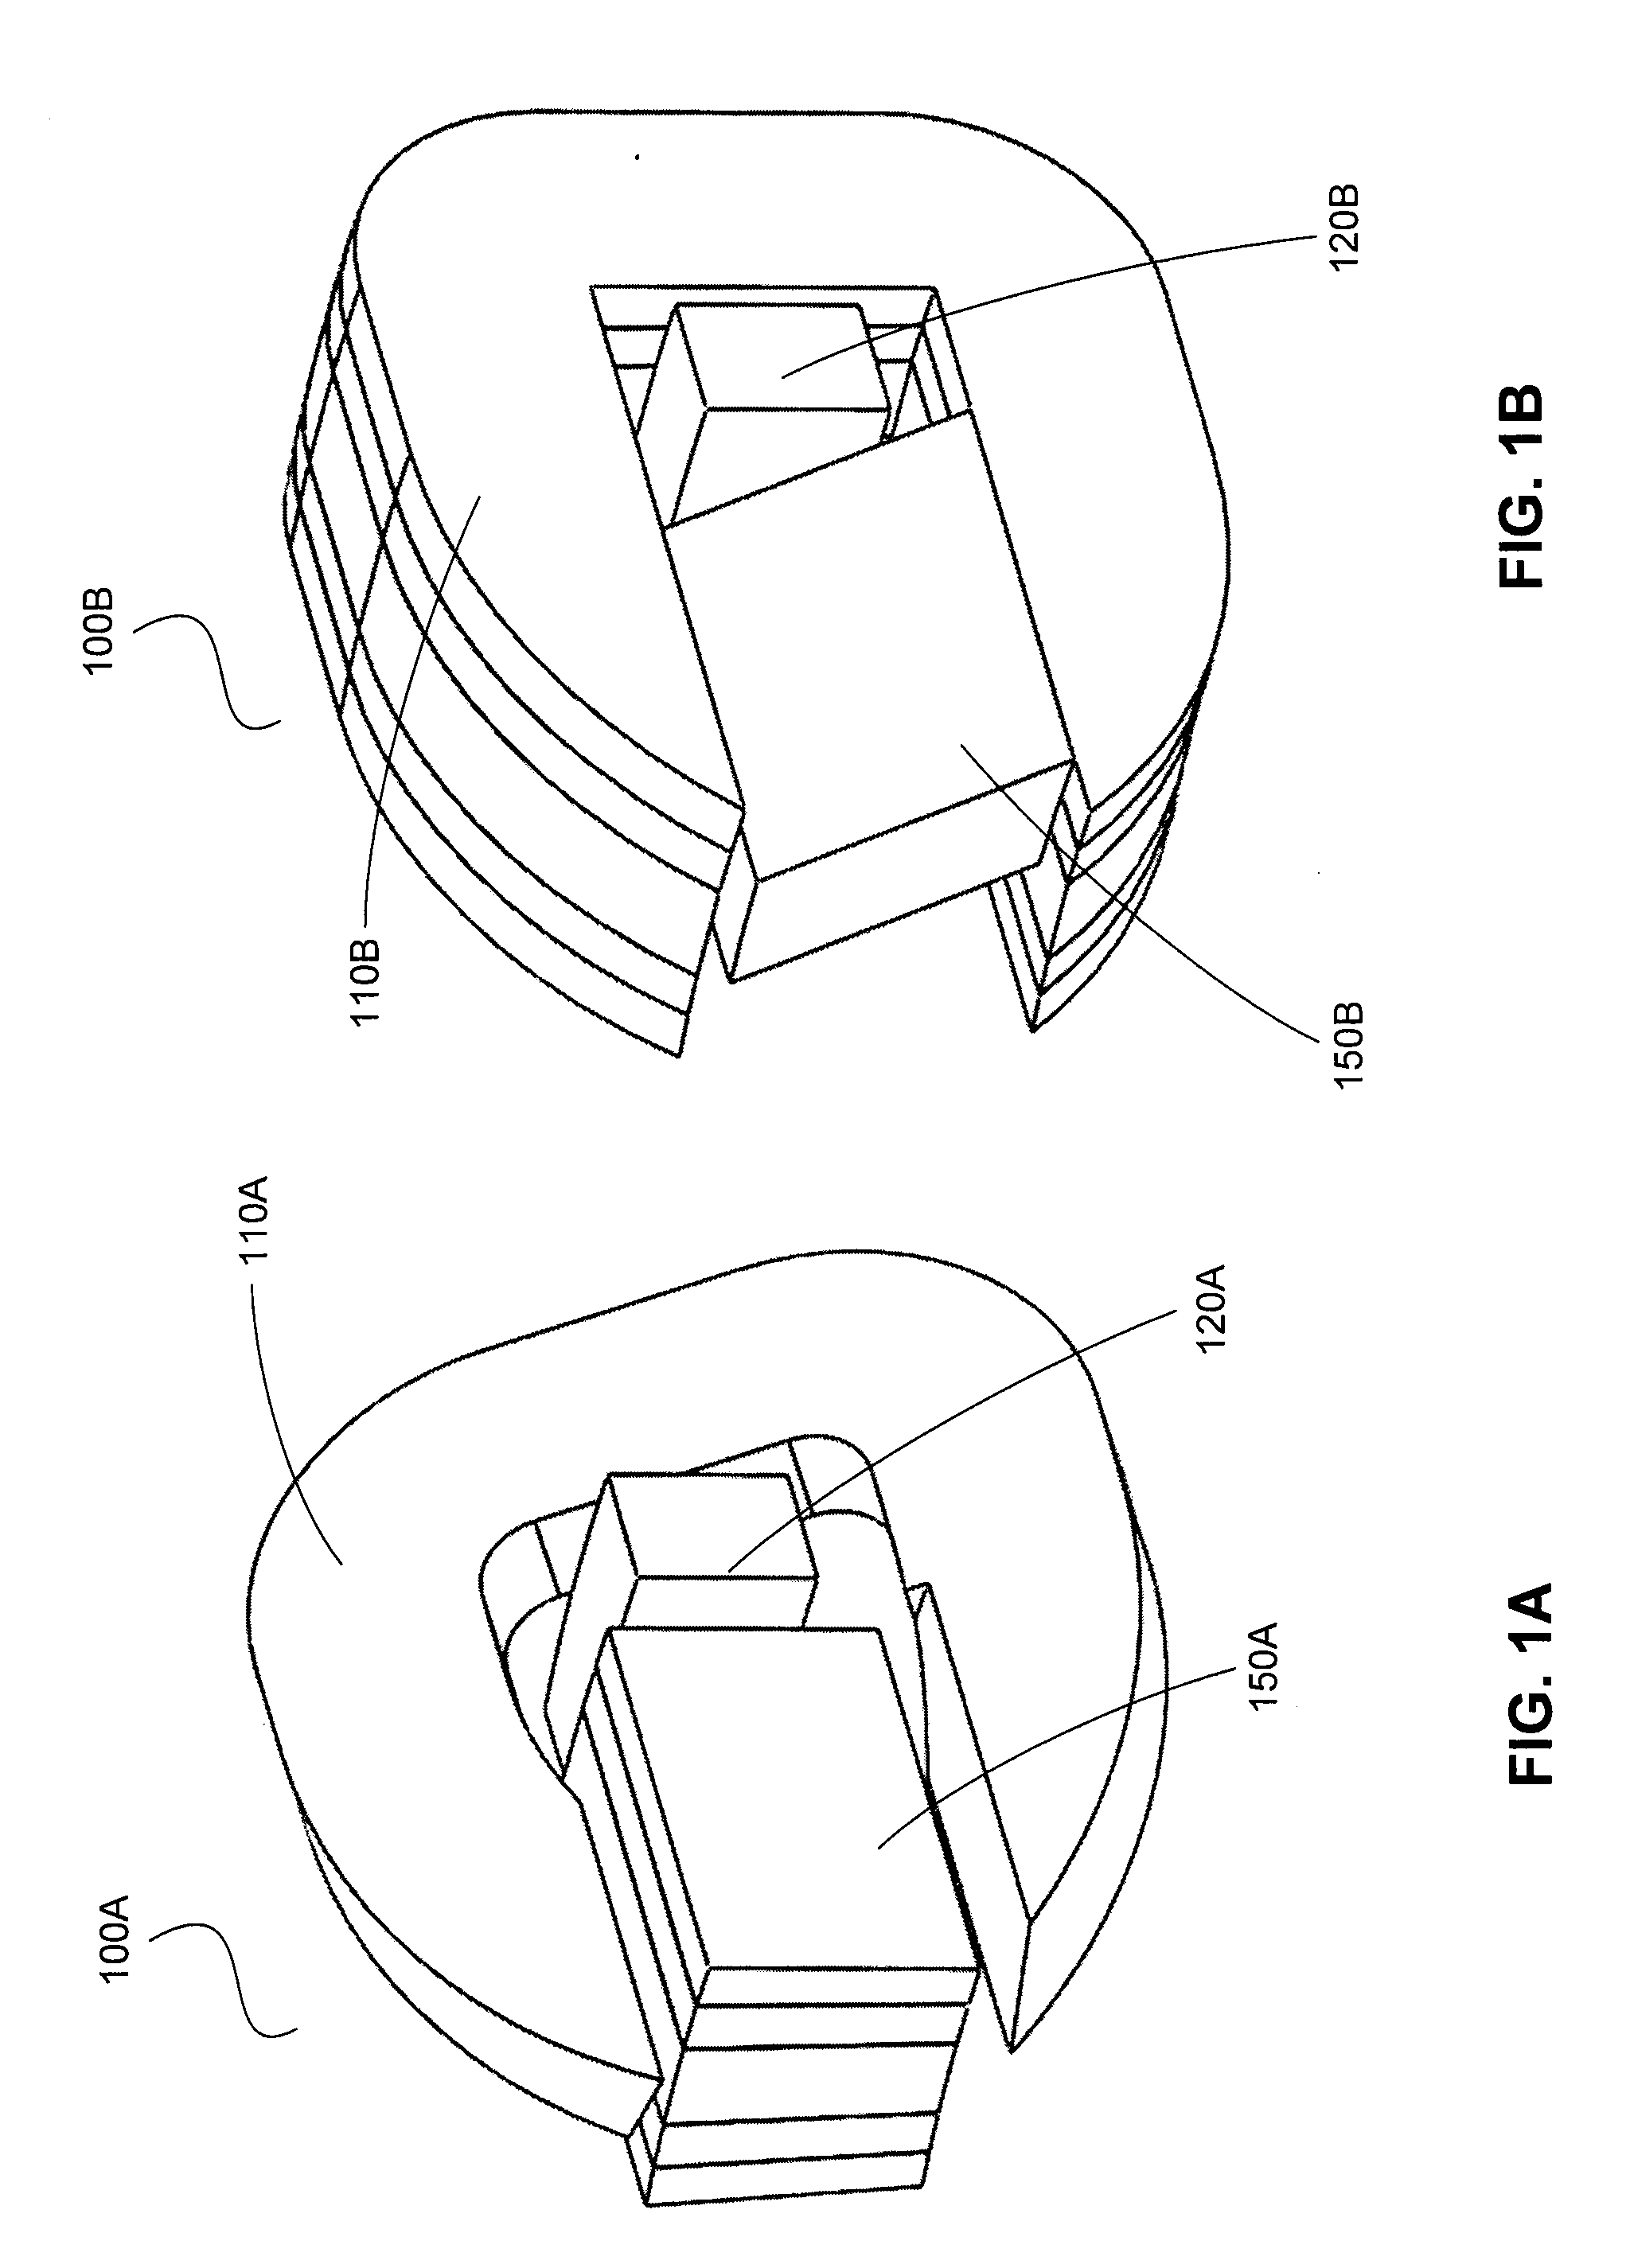 Polyphase transverse and/or commutated flux systems